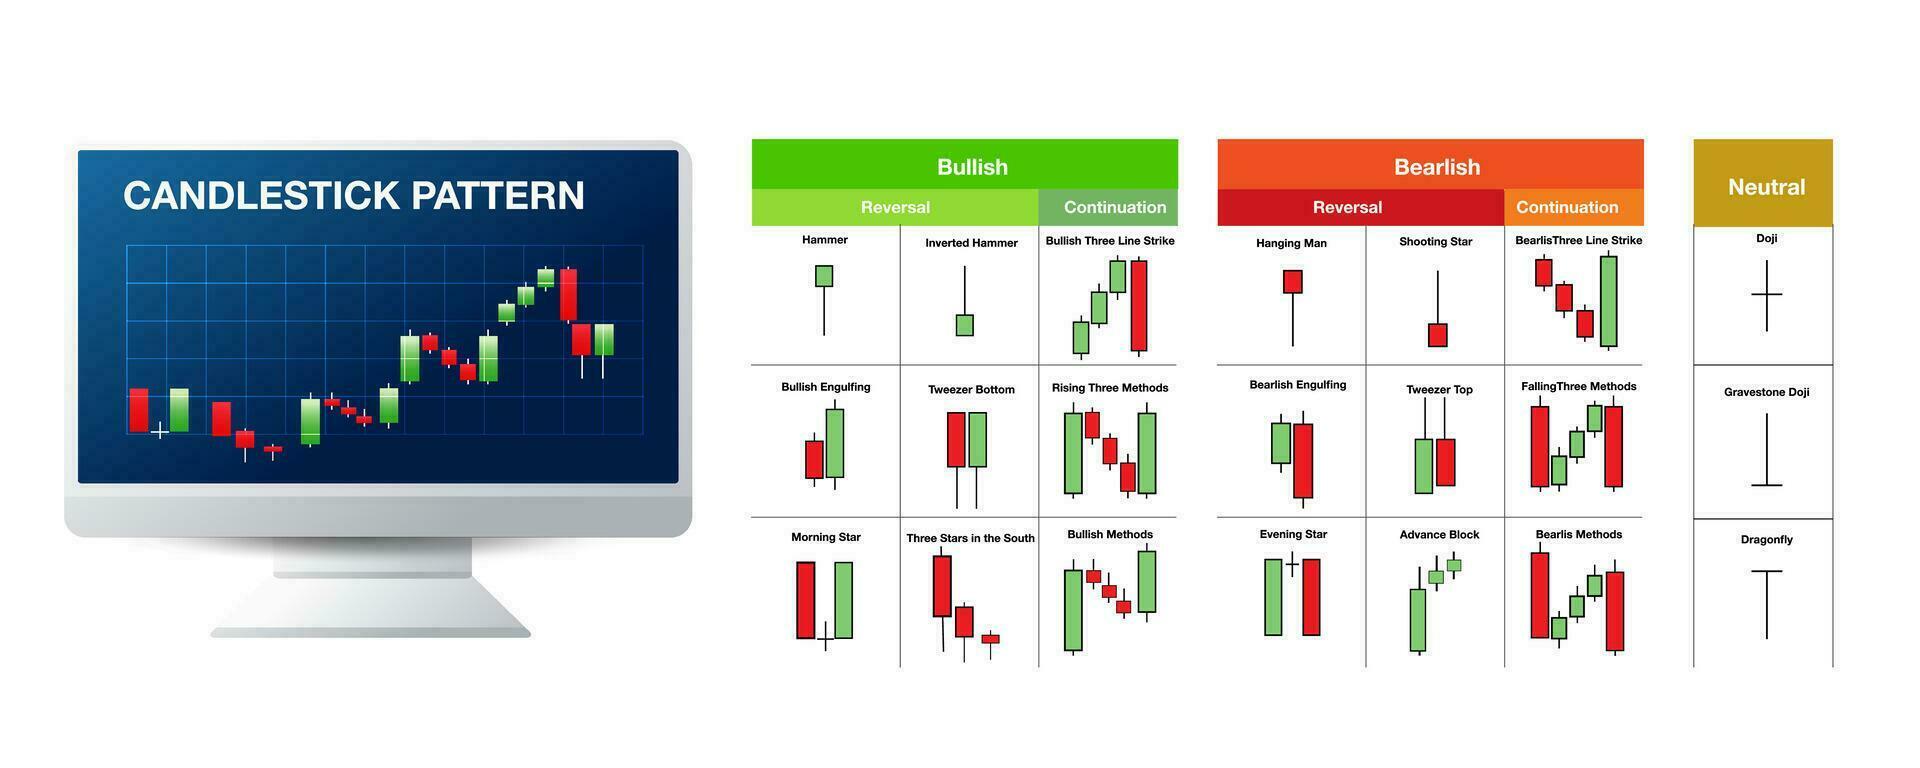 candlestick indicator for stock market forex for sell and buy signal icon vector